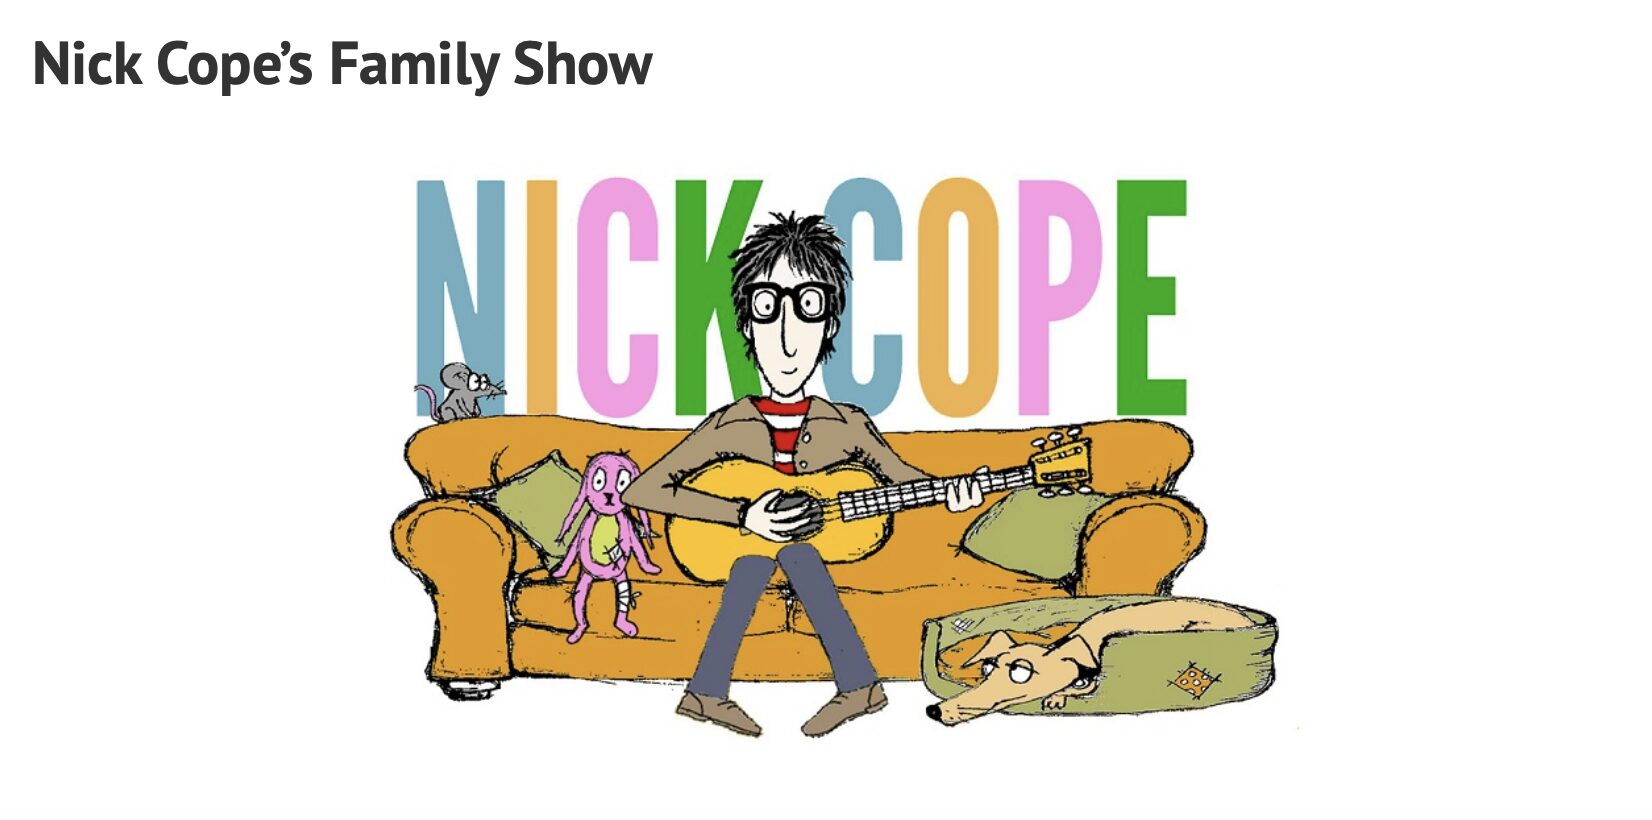 Nick Cope’s Family Show